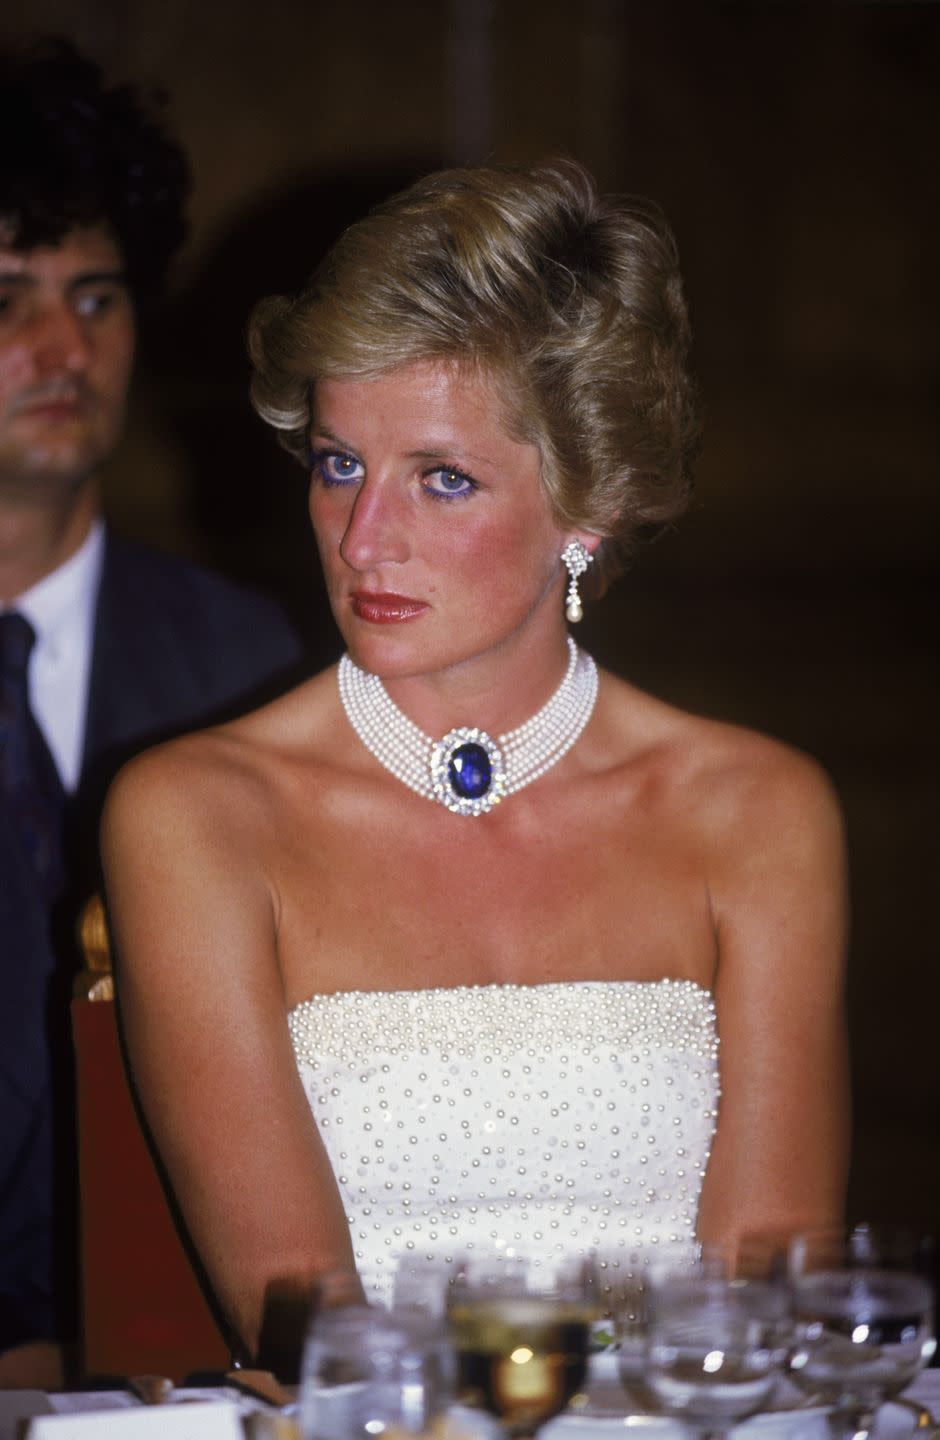 Chokers Are in Style Again but They've Been a Royal Jewelry Staple for Centuries